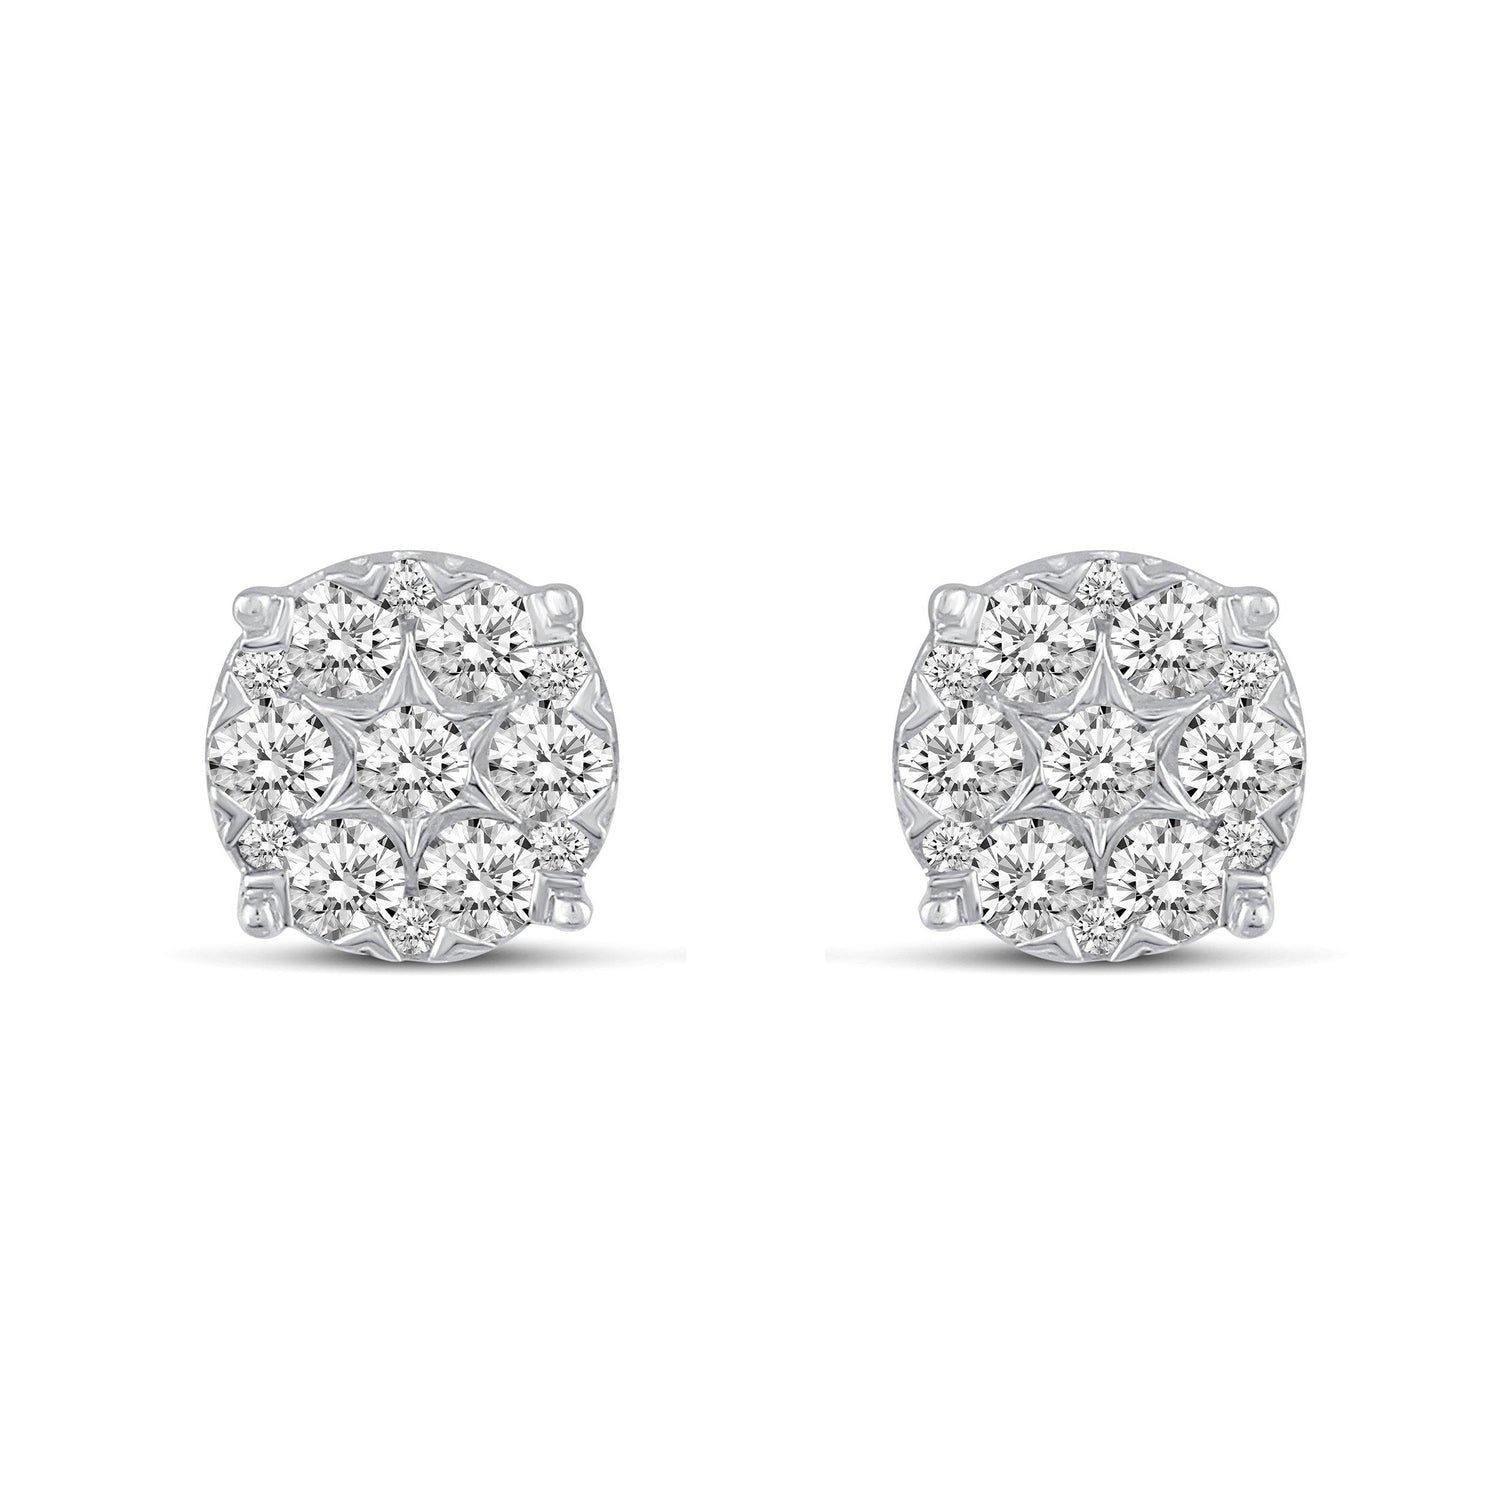 1/4 - 1 Cttw Diamond Round Grand Cluster Stud Earrings 1.0ct / 14K White Gold / I2 (It Will Take 2 ~3 Weeks to Be delivered)